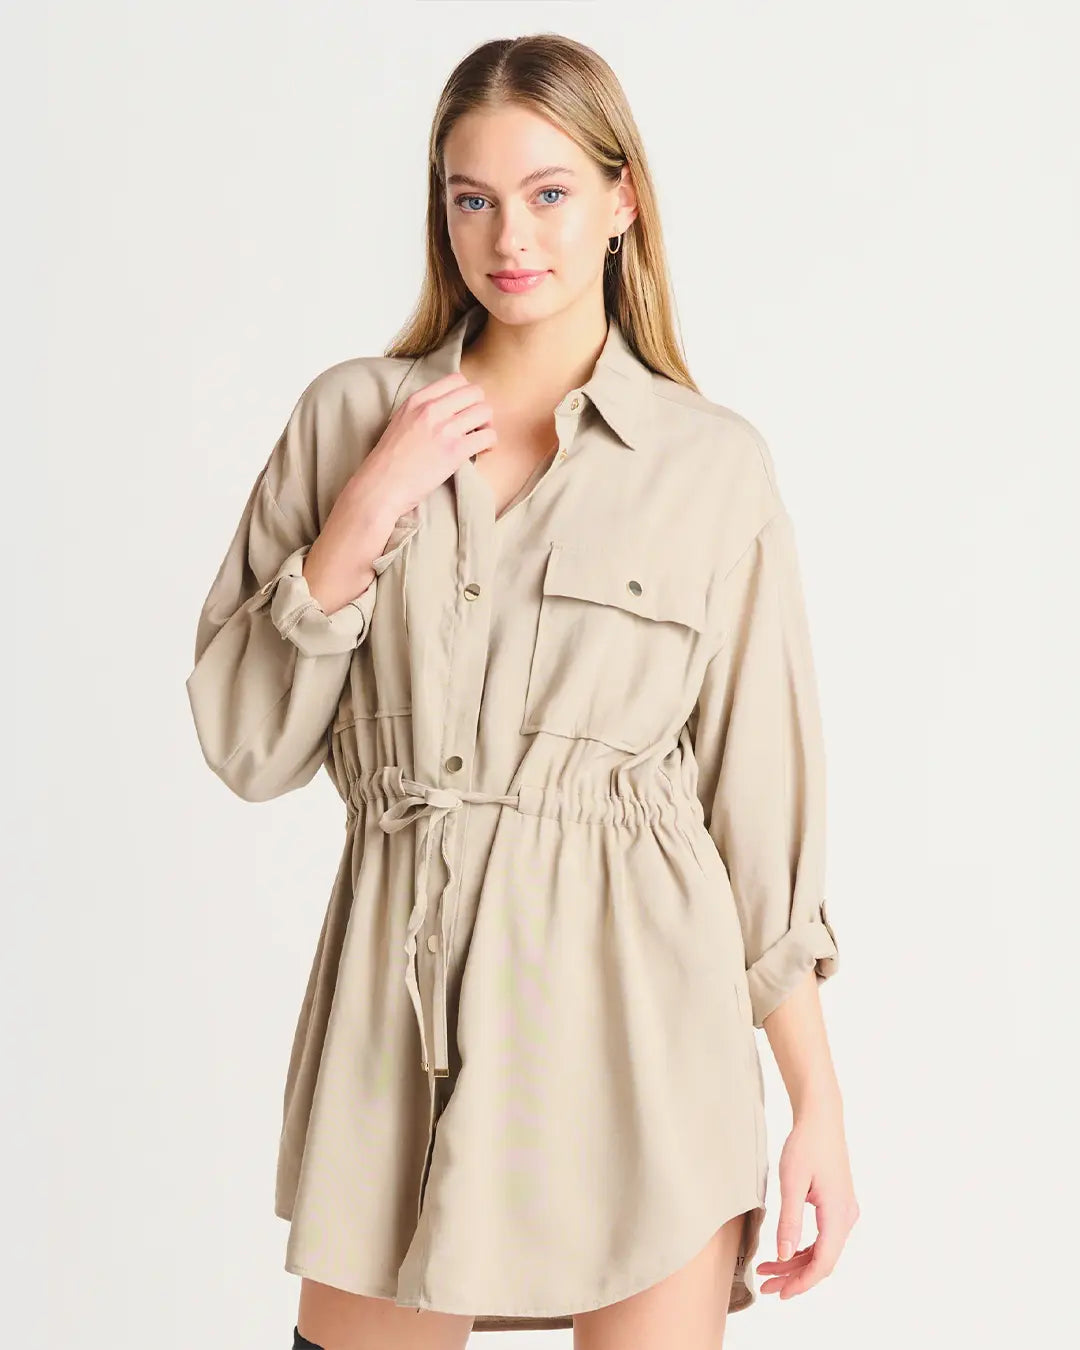 Comfy and cute? Yes, please! This button down utility dress with collar and drawstring waist is perfect for the cooler temps. You can even wear open as a jacket. The possibilities are endless!